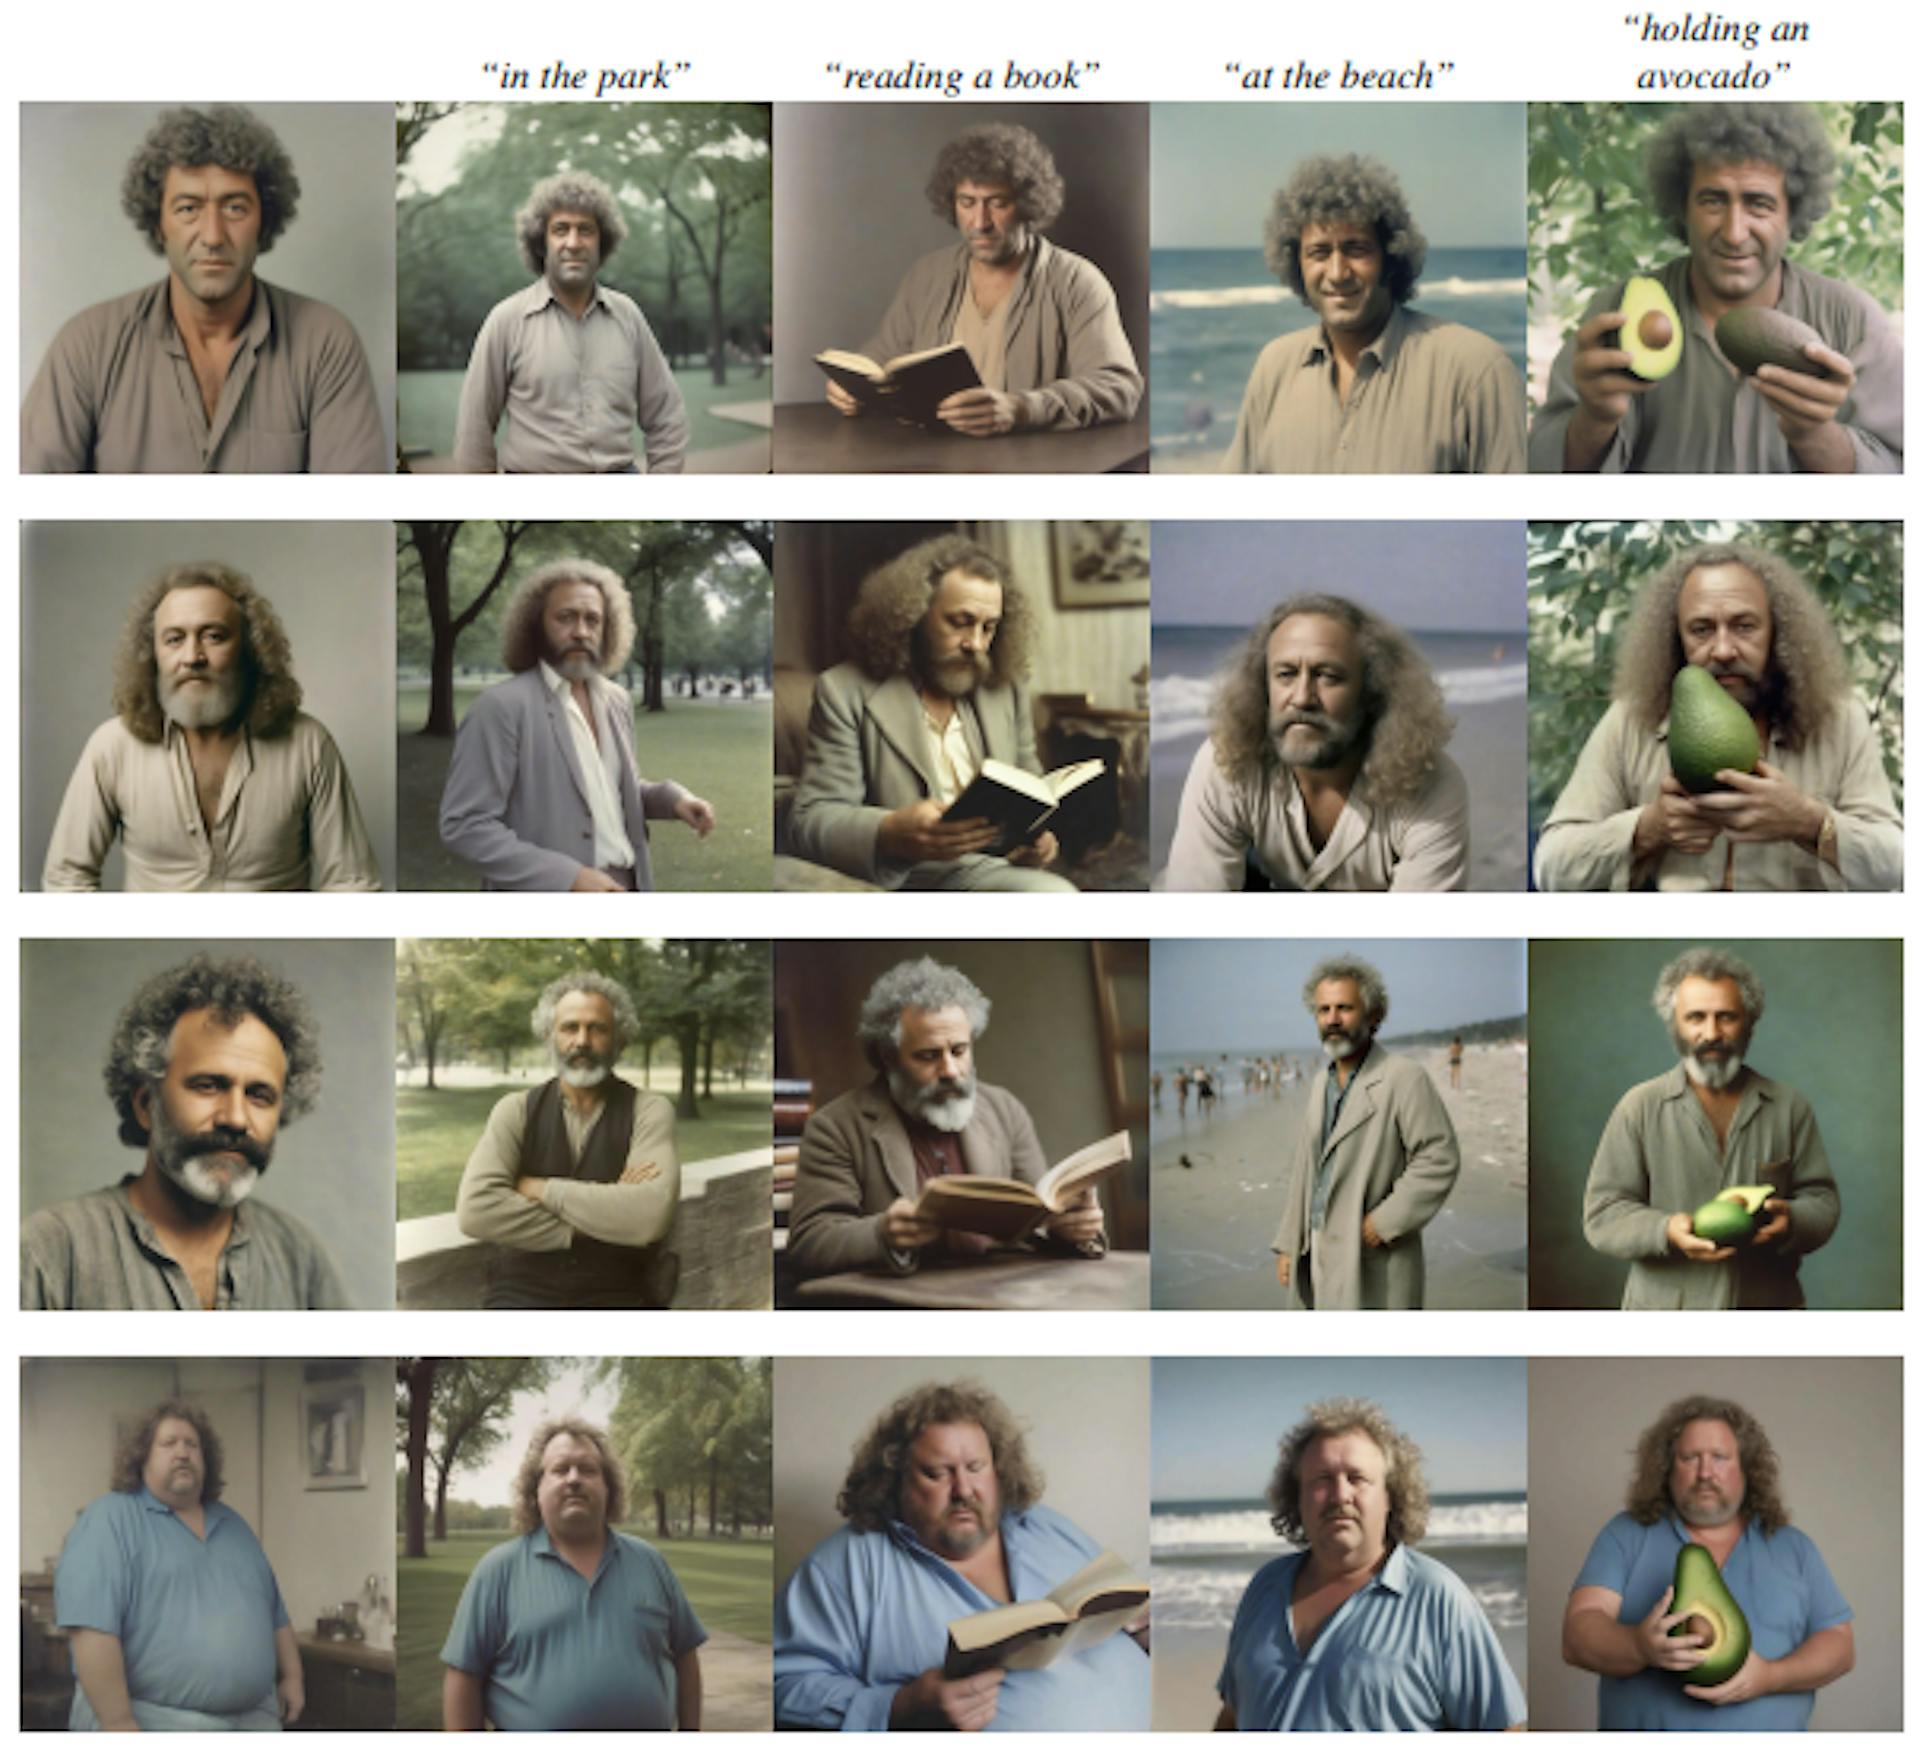 Figure 16. Non-determinism. By running our method multiple times, given the same prompt “a photo of a 50 years old man with curly hair”, but using different initial seeds, we obtain different consistent characters corresponding to the text prompt.